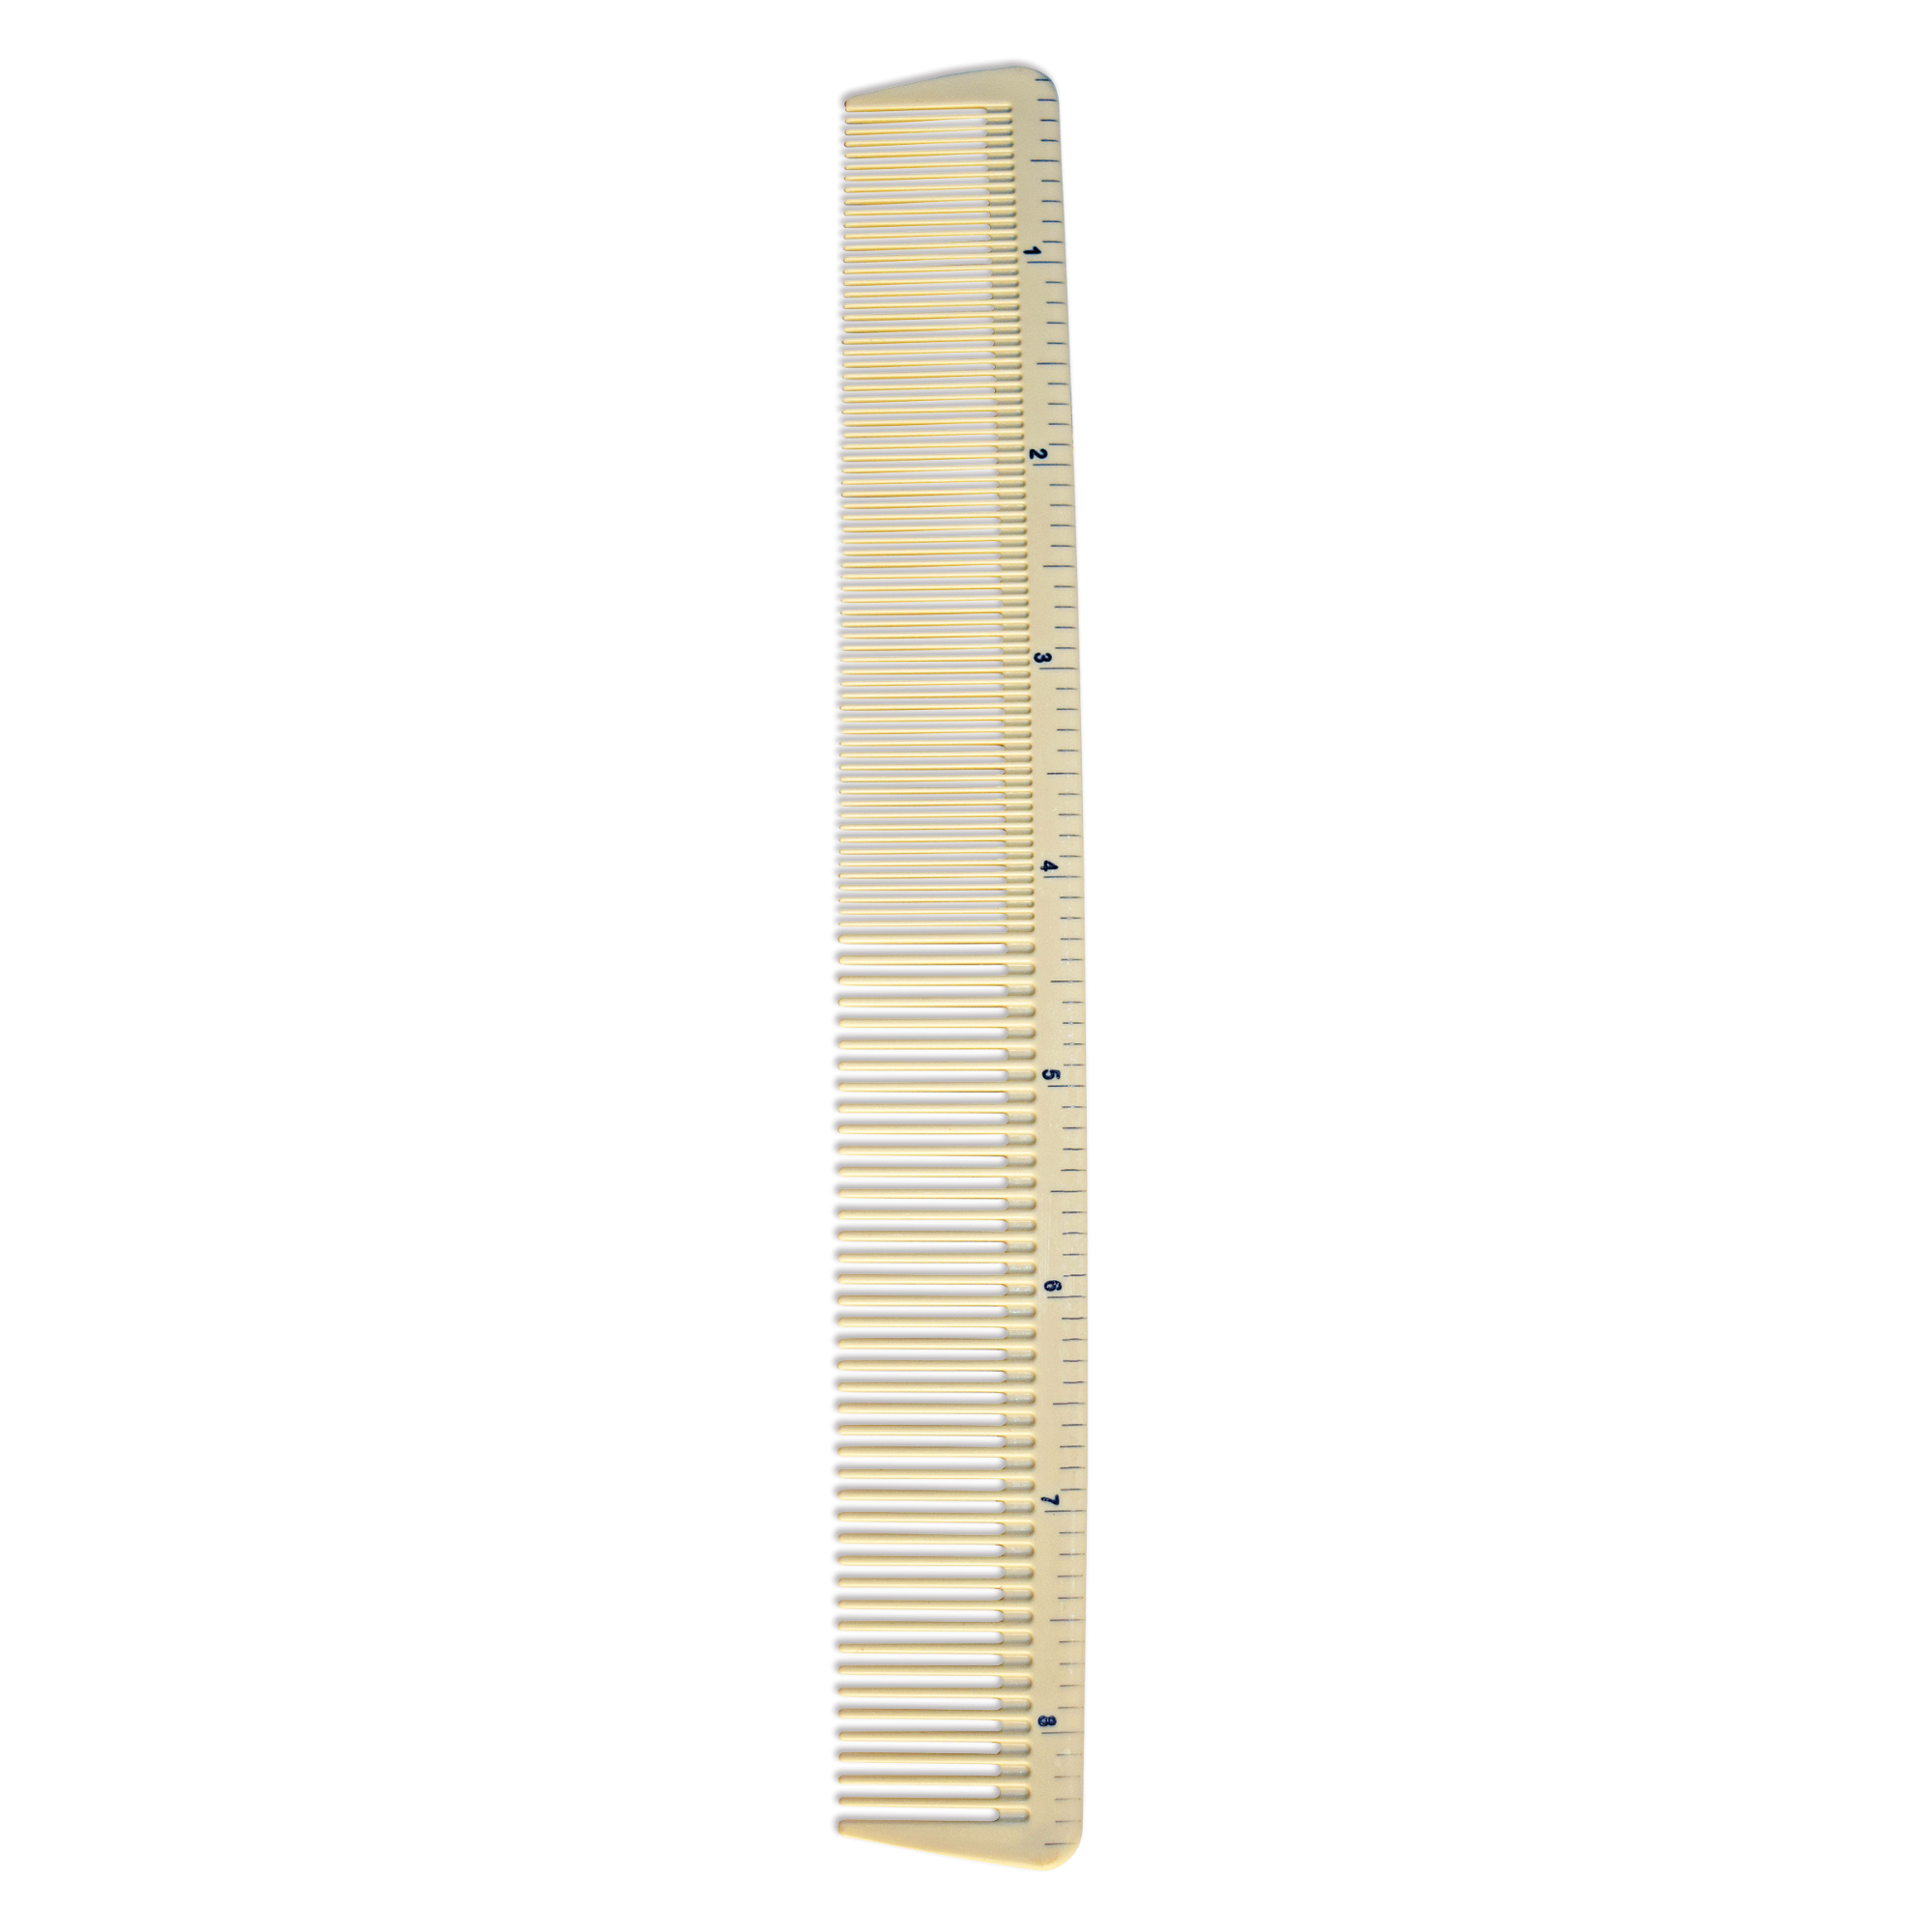 Cutting Comb with Measurement Marks - 8-1/2"